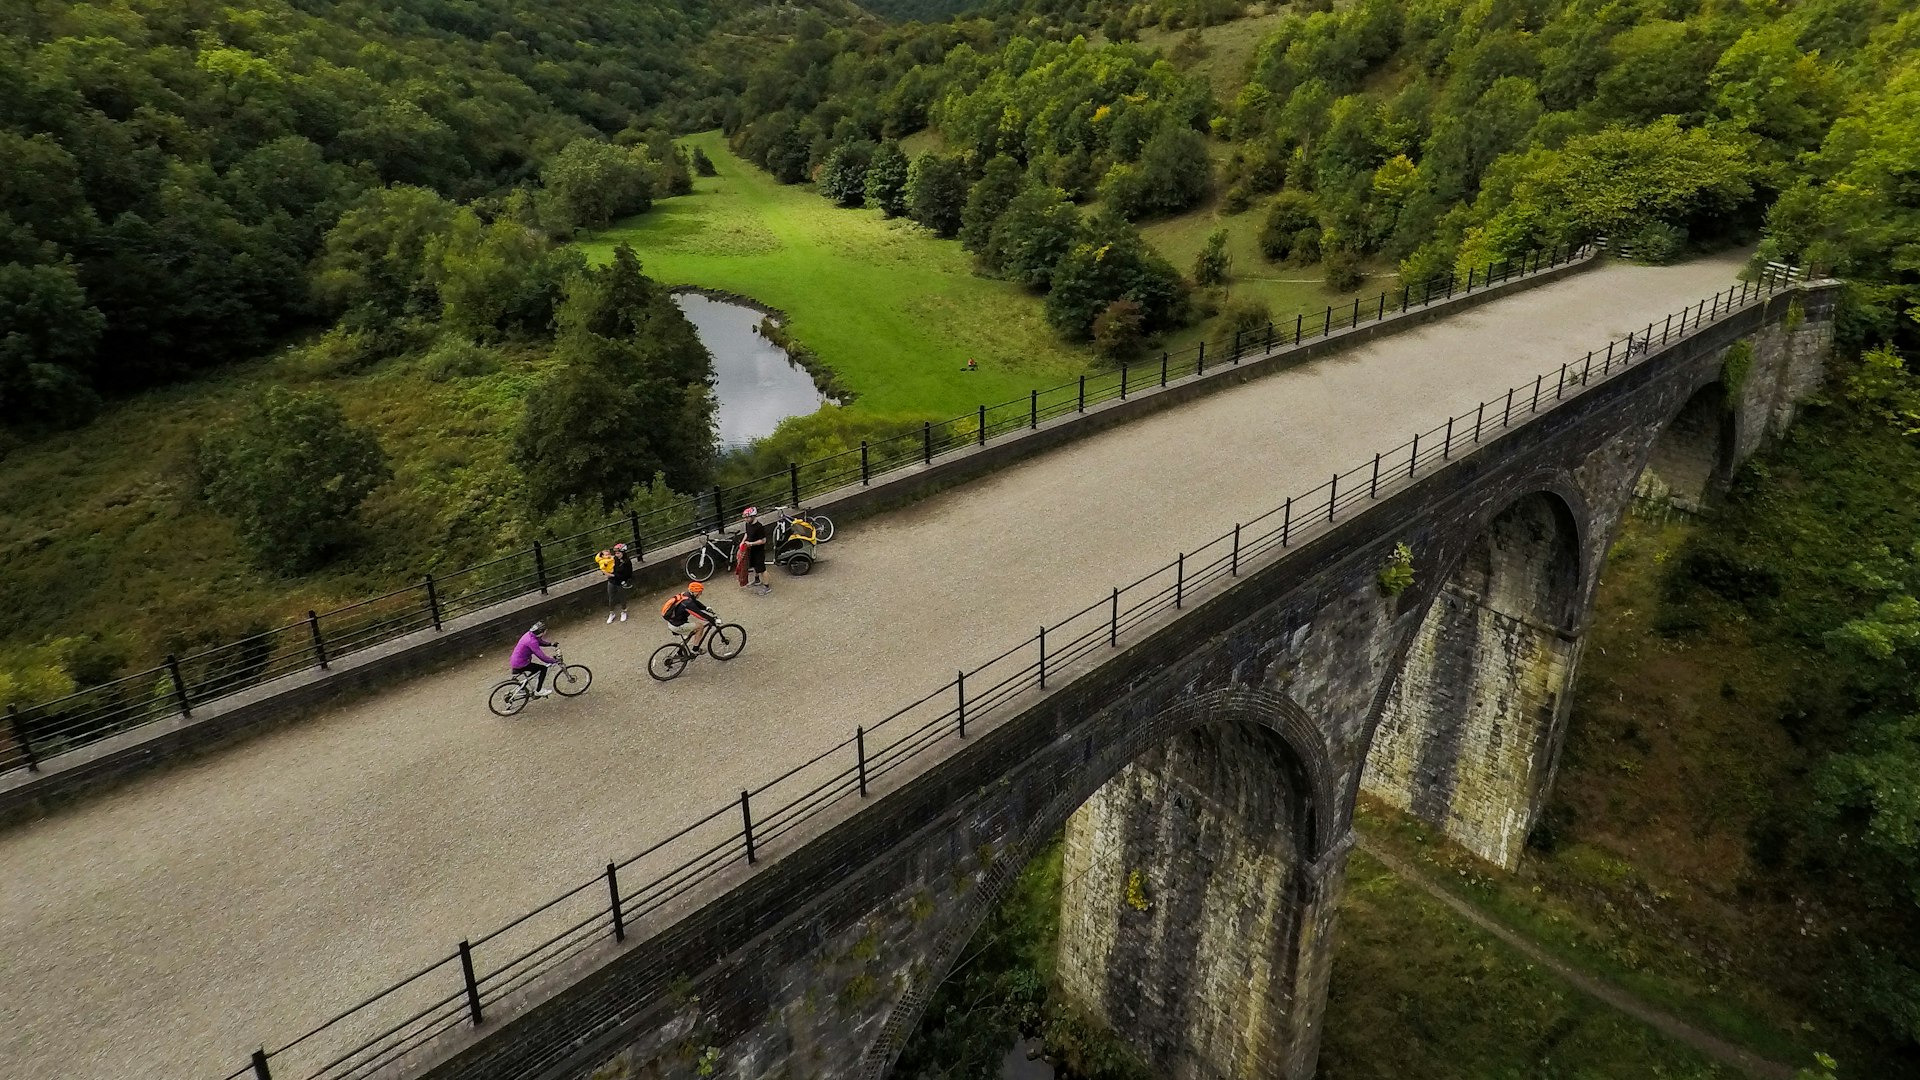 An aqueduct that's been converted to a cycling path, with several cyclists riding over it in the Peak District